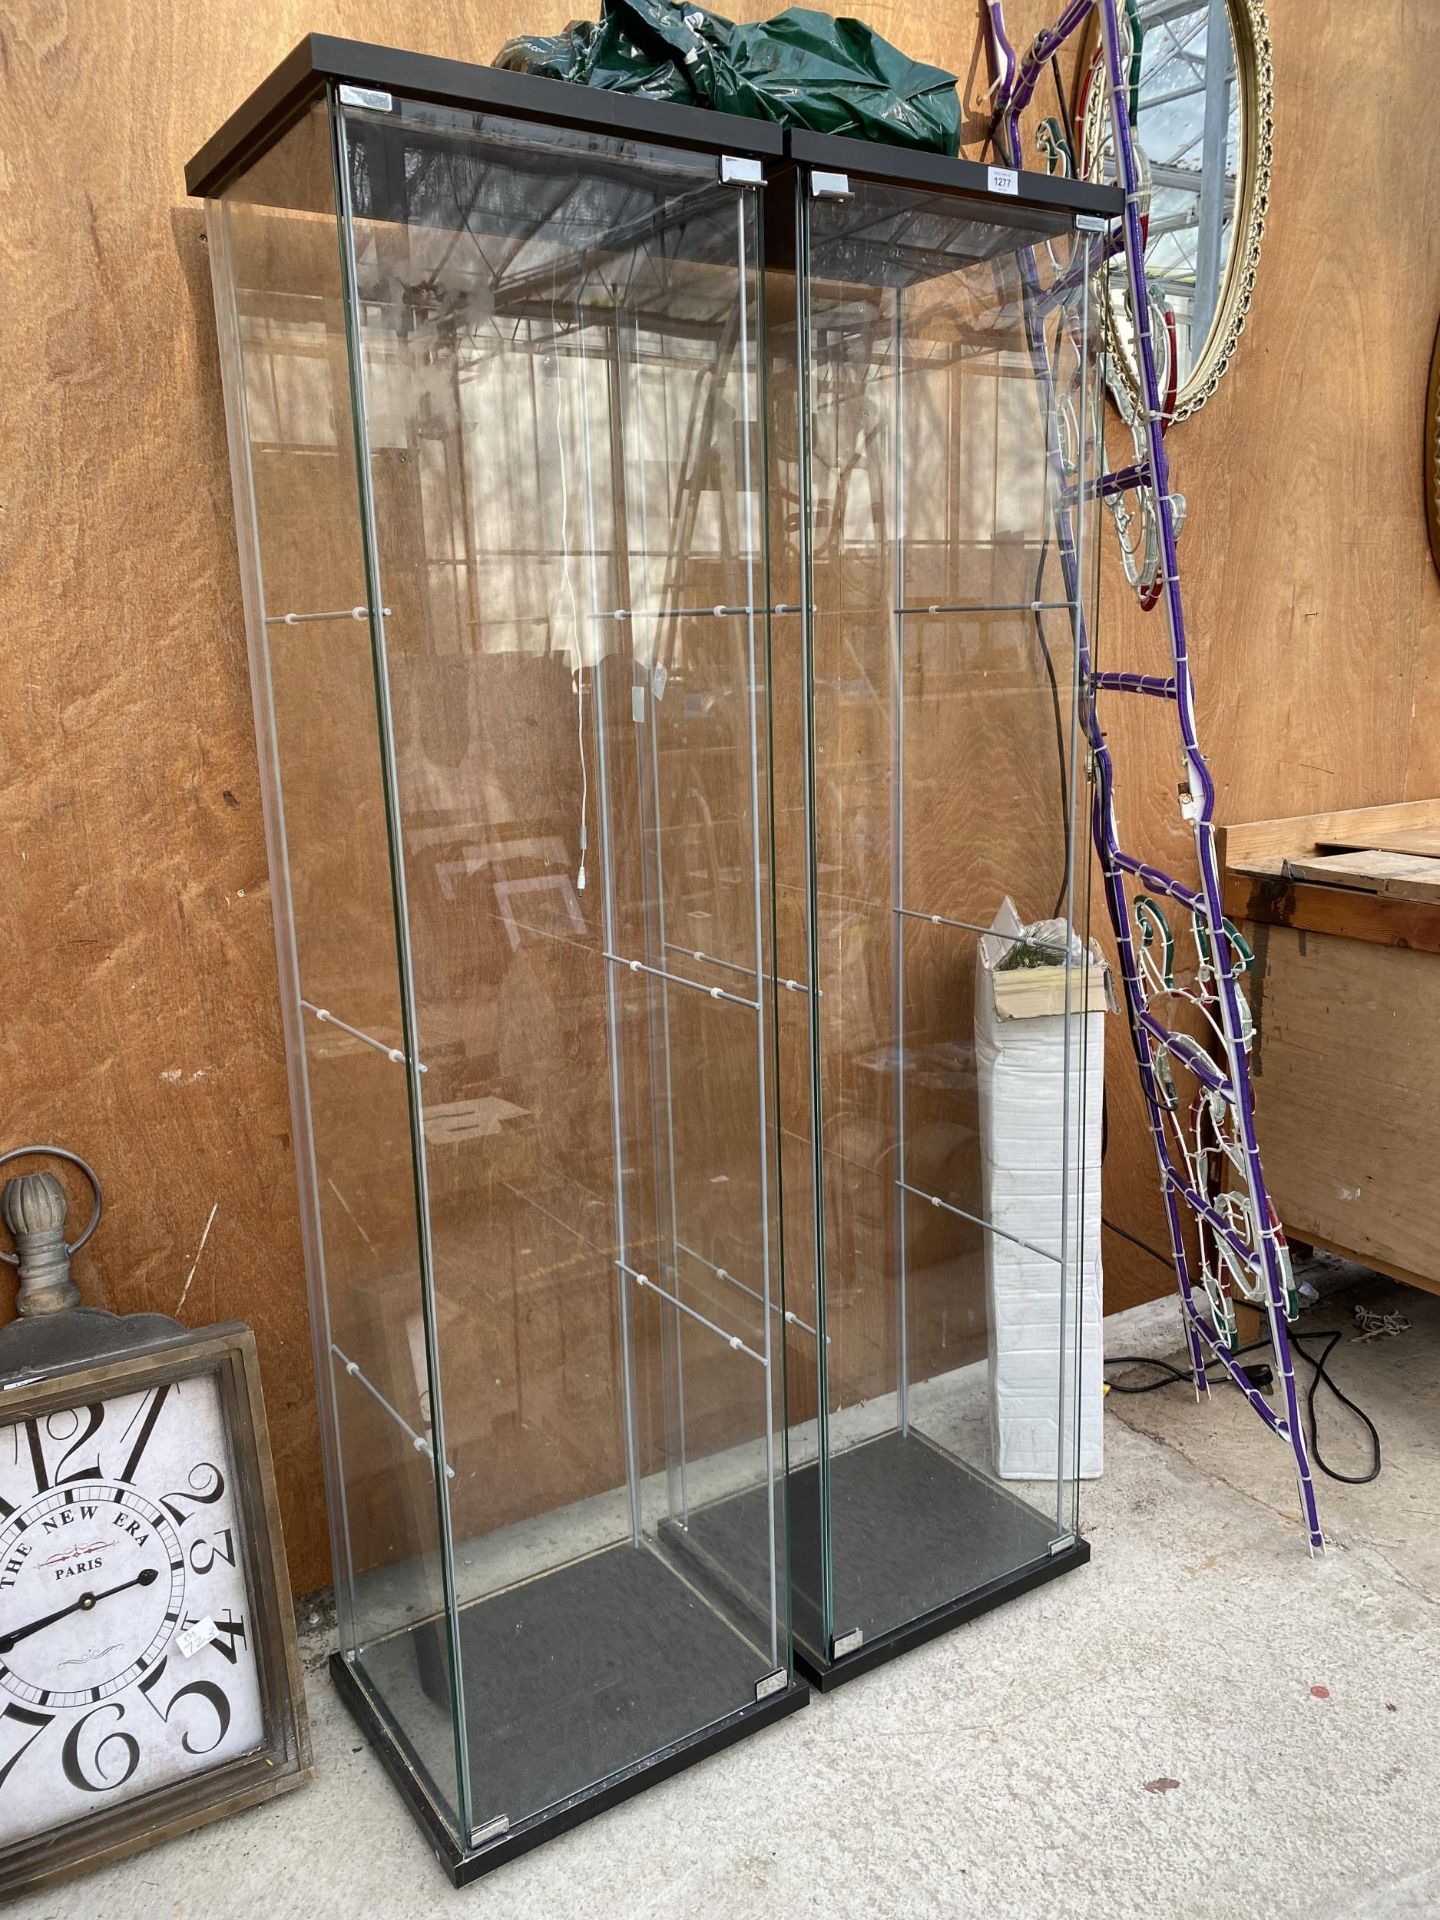 A PAIR OF GLASS DISPLAY CABINETS COMPLETE WITH THREE GLASS SHELVES EACH